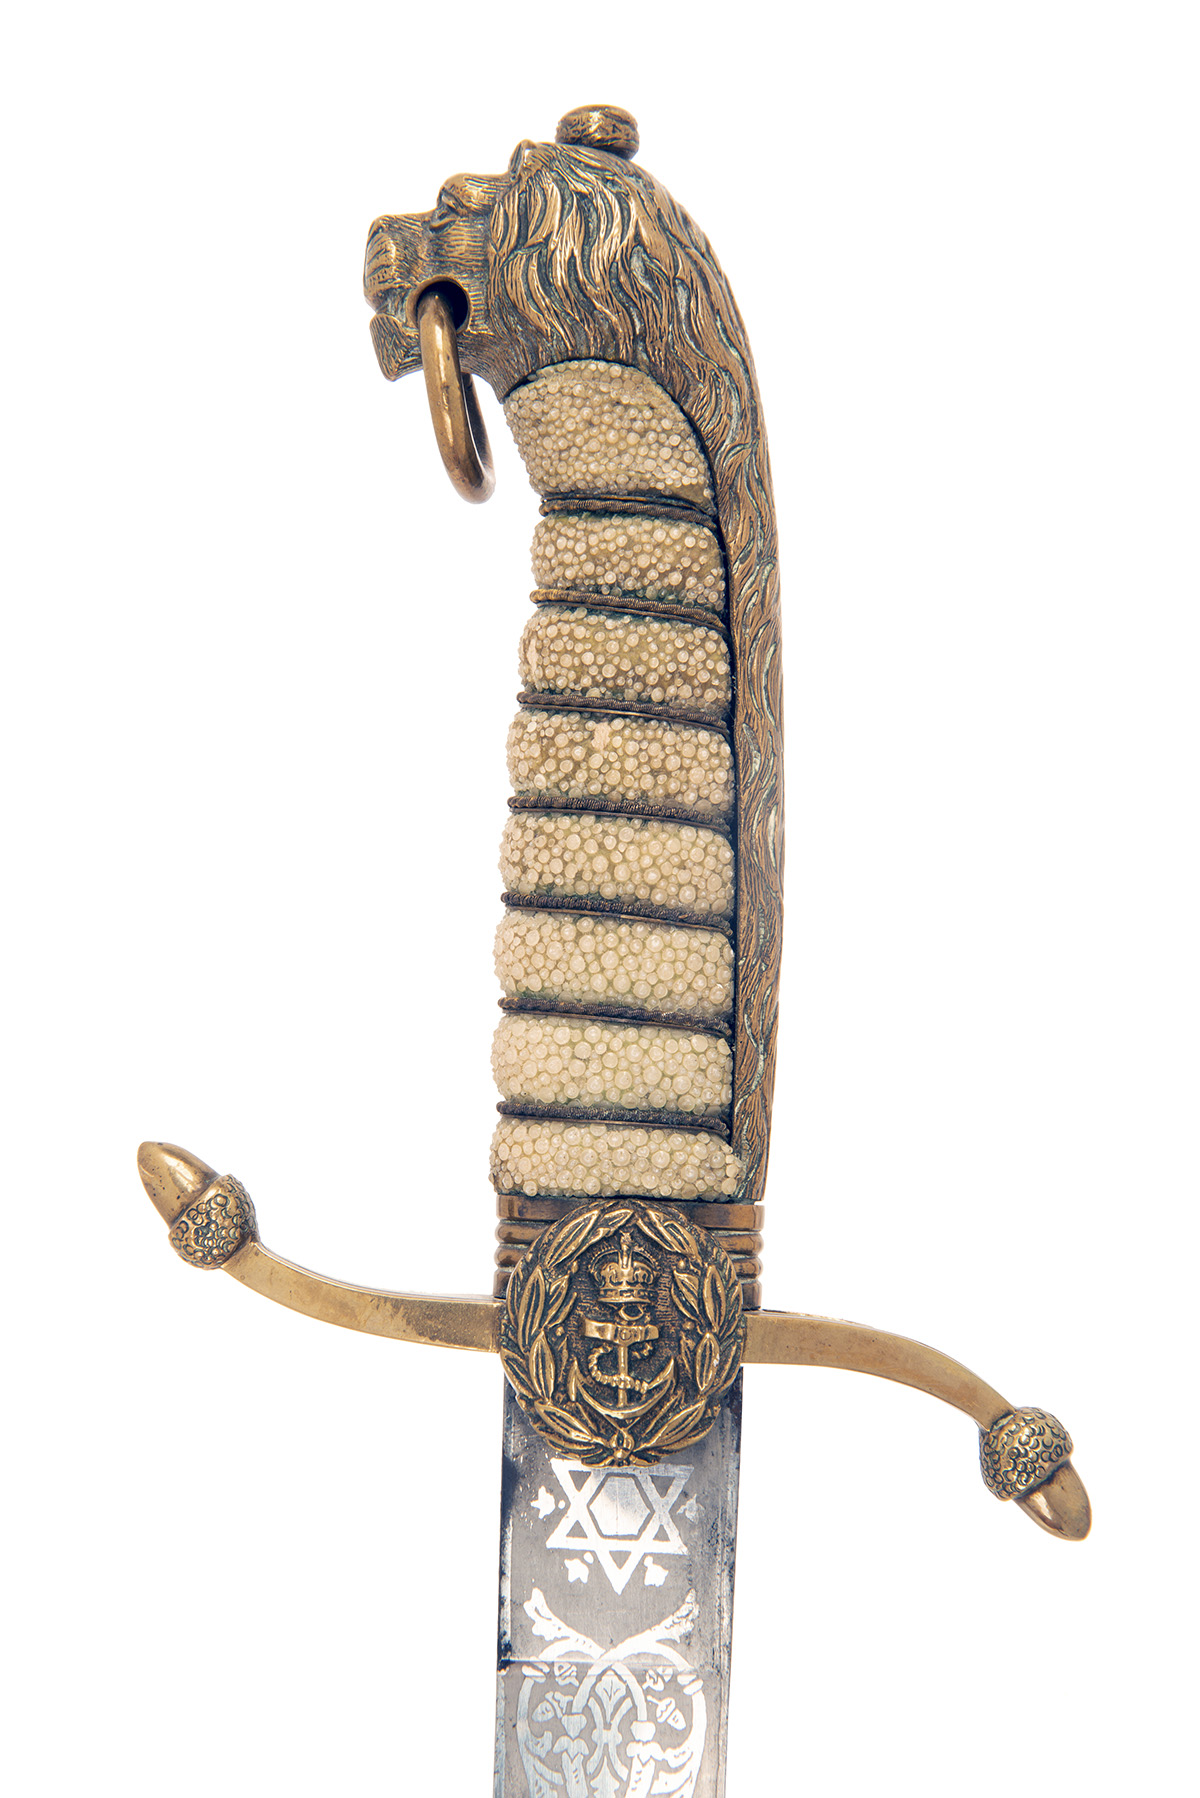 A BRITISH MIDSHIPMAN'S PATTERN 1887 NAVAL DIRK SIGNED GIEVE MATTHEWS AND SEAGROVE LTD, circa World - Image 3 of 3